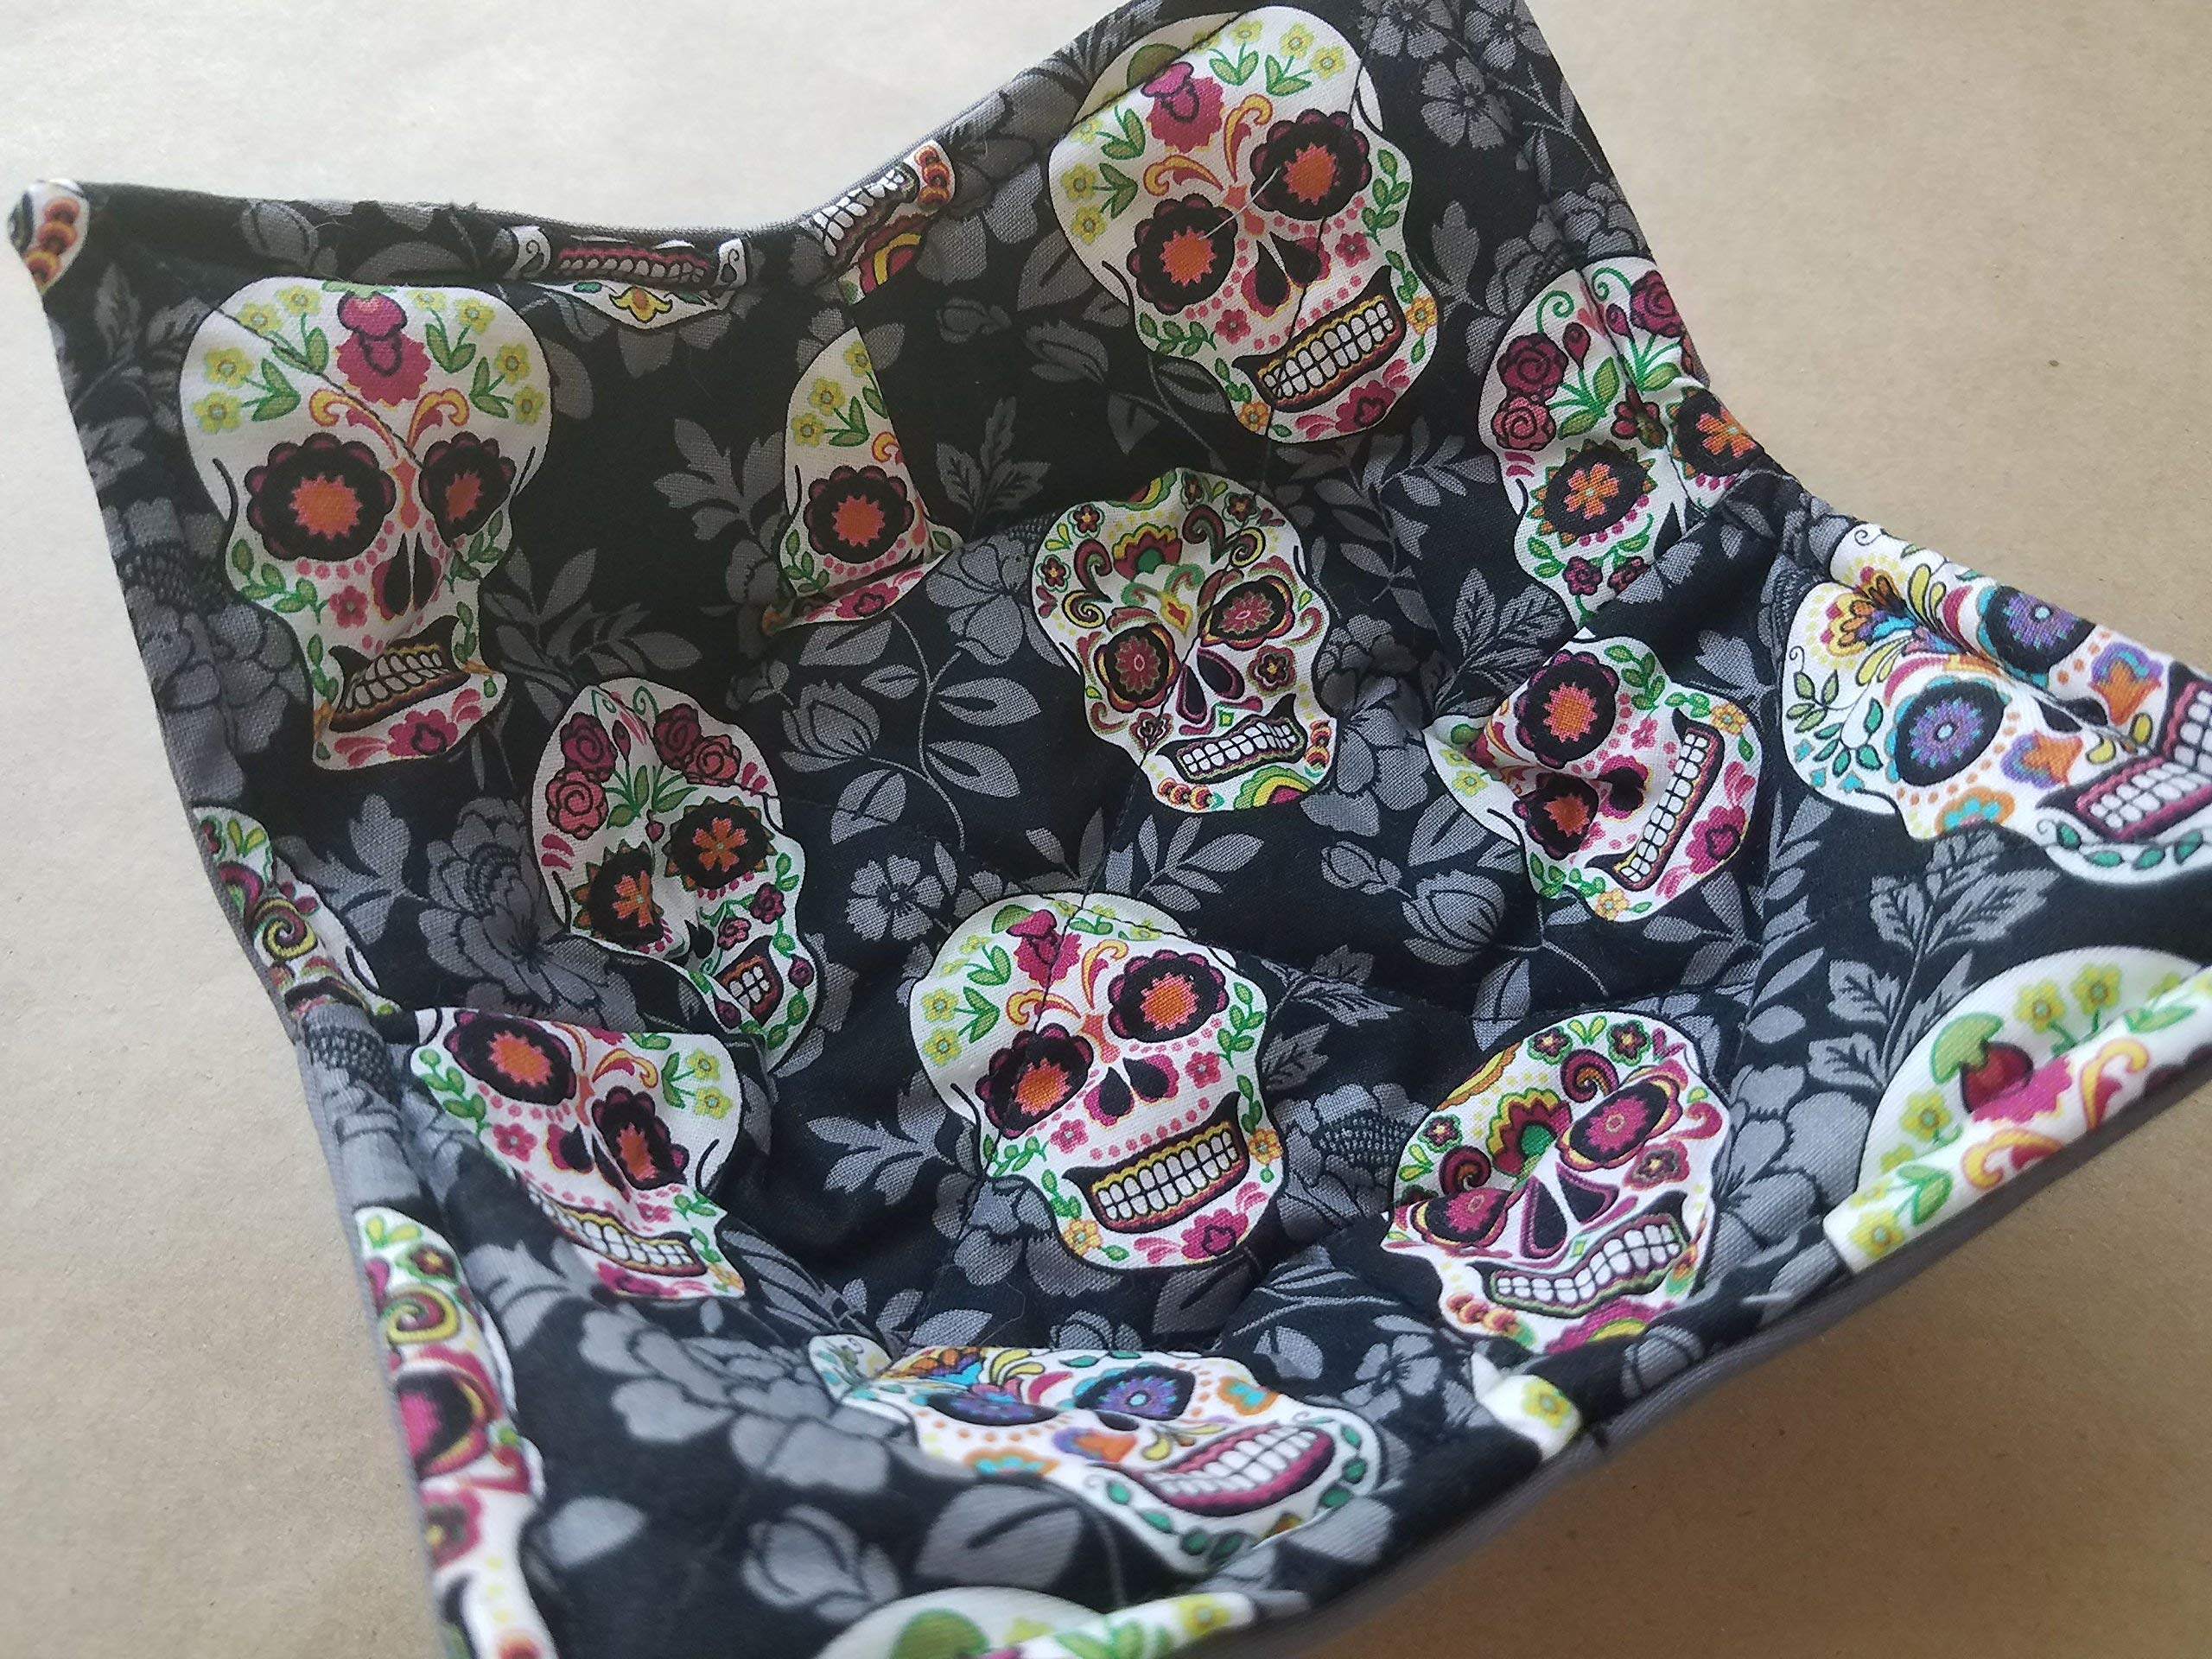 Sugar Skull Microwave Bowl Cozy Día de Muertos Reversible Microwaveable Pot Holder Day of the Dead Bowl Holder Day of the Dead Kitchen Linens Skull Home Decor Gifts Under 10 Halloween Hostess Gift